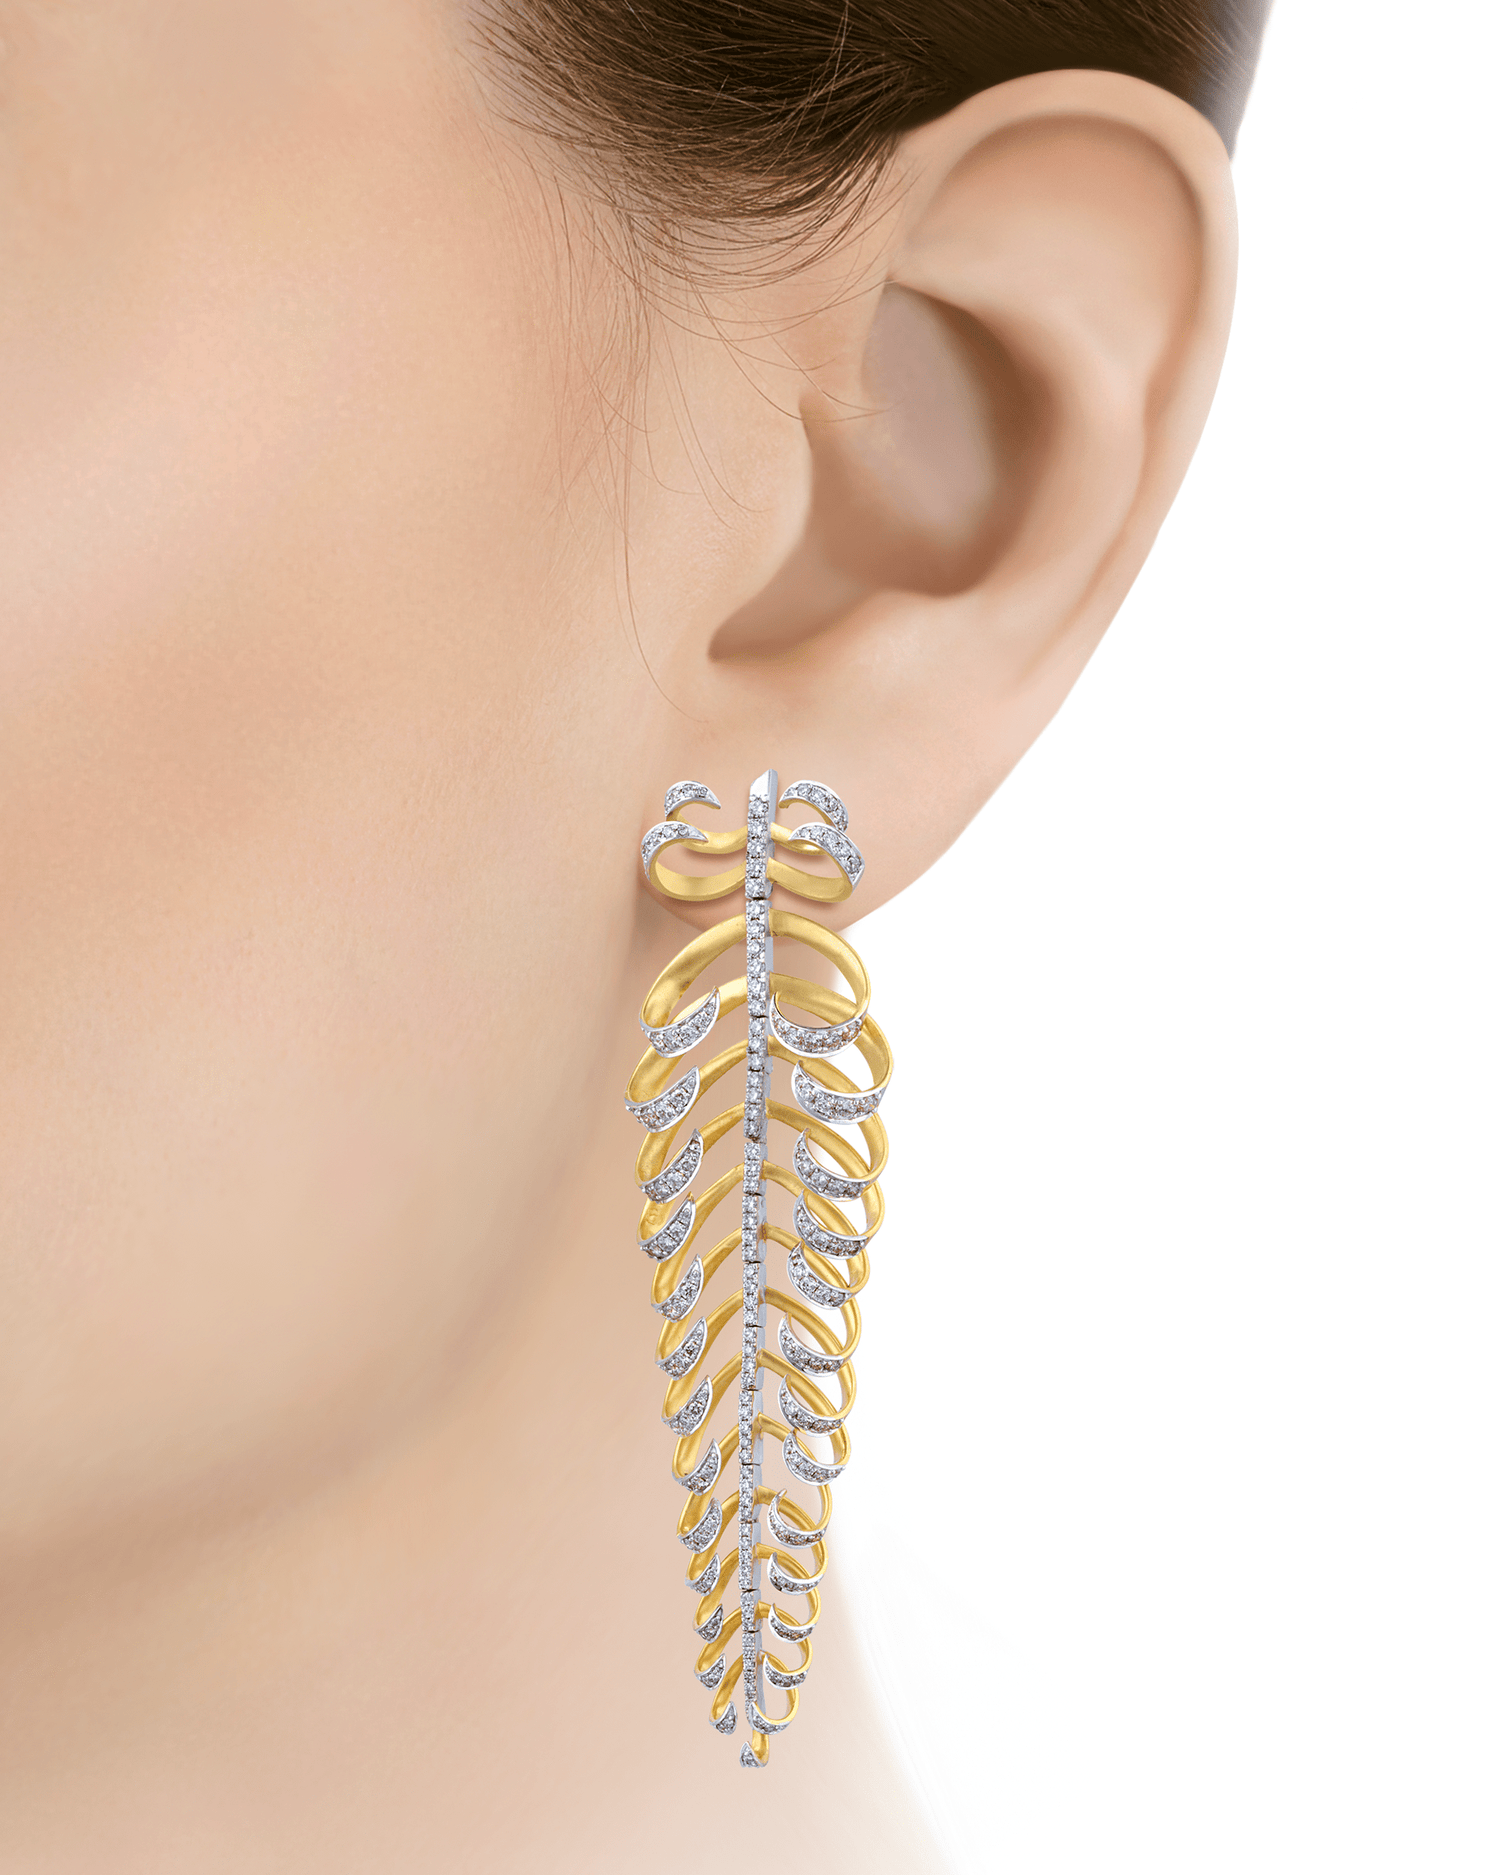 Diamond and Gold Earrings, 4.19 Carats